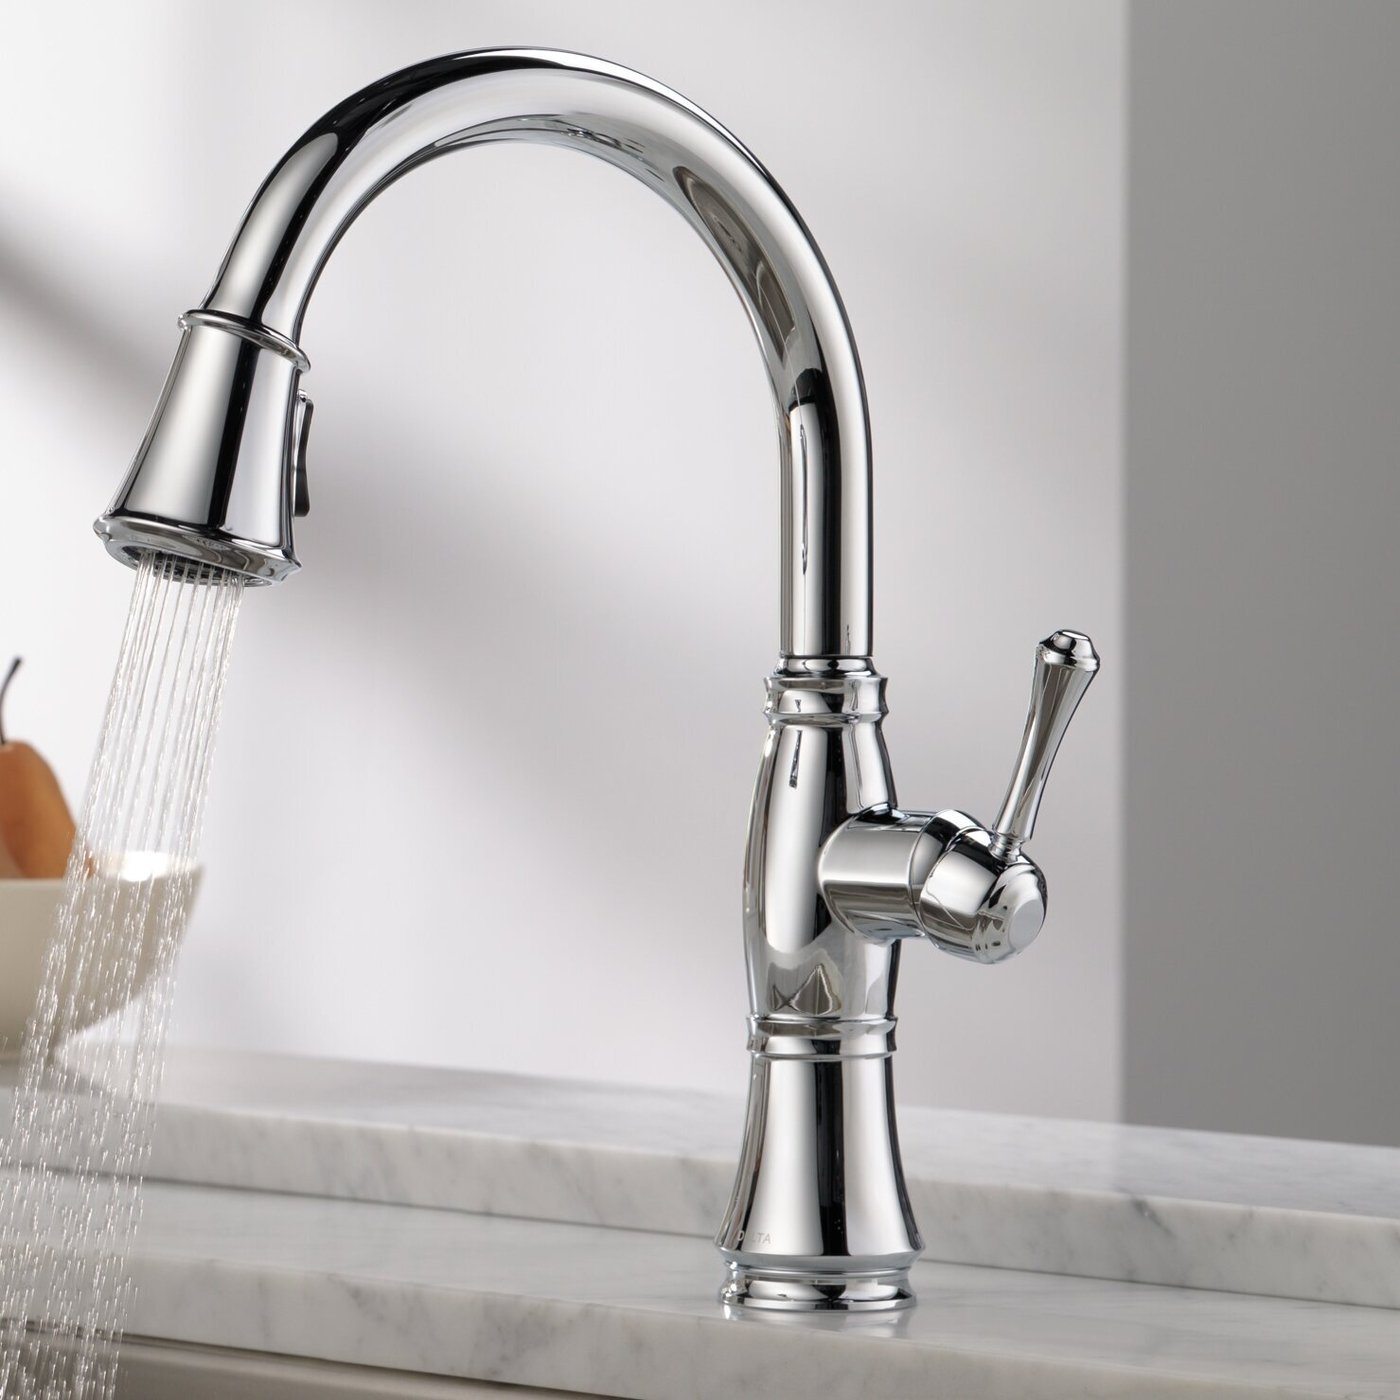 4 Expert Tips To Choose A Kitchen Faucet VisualHunt